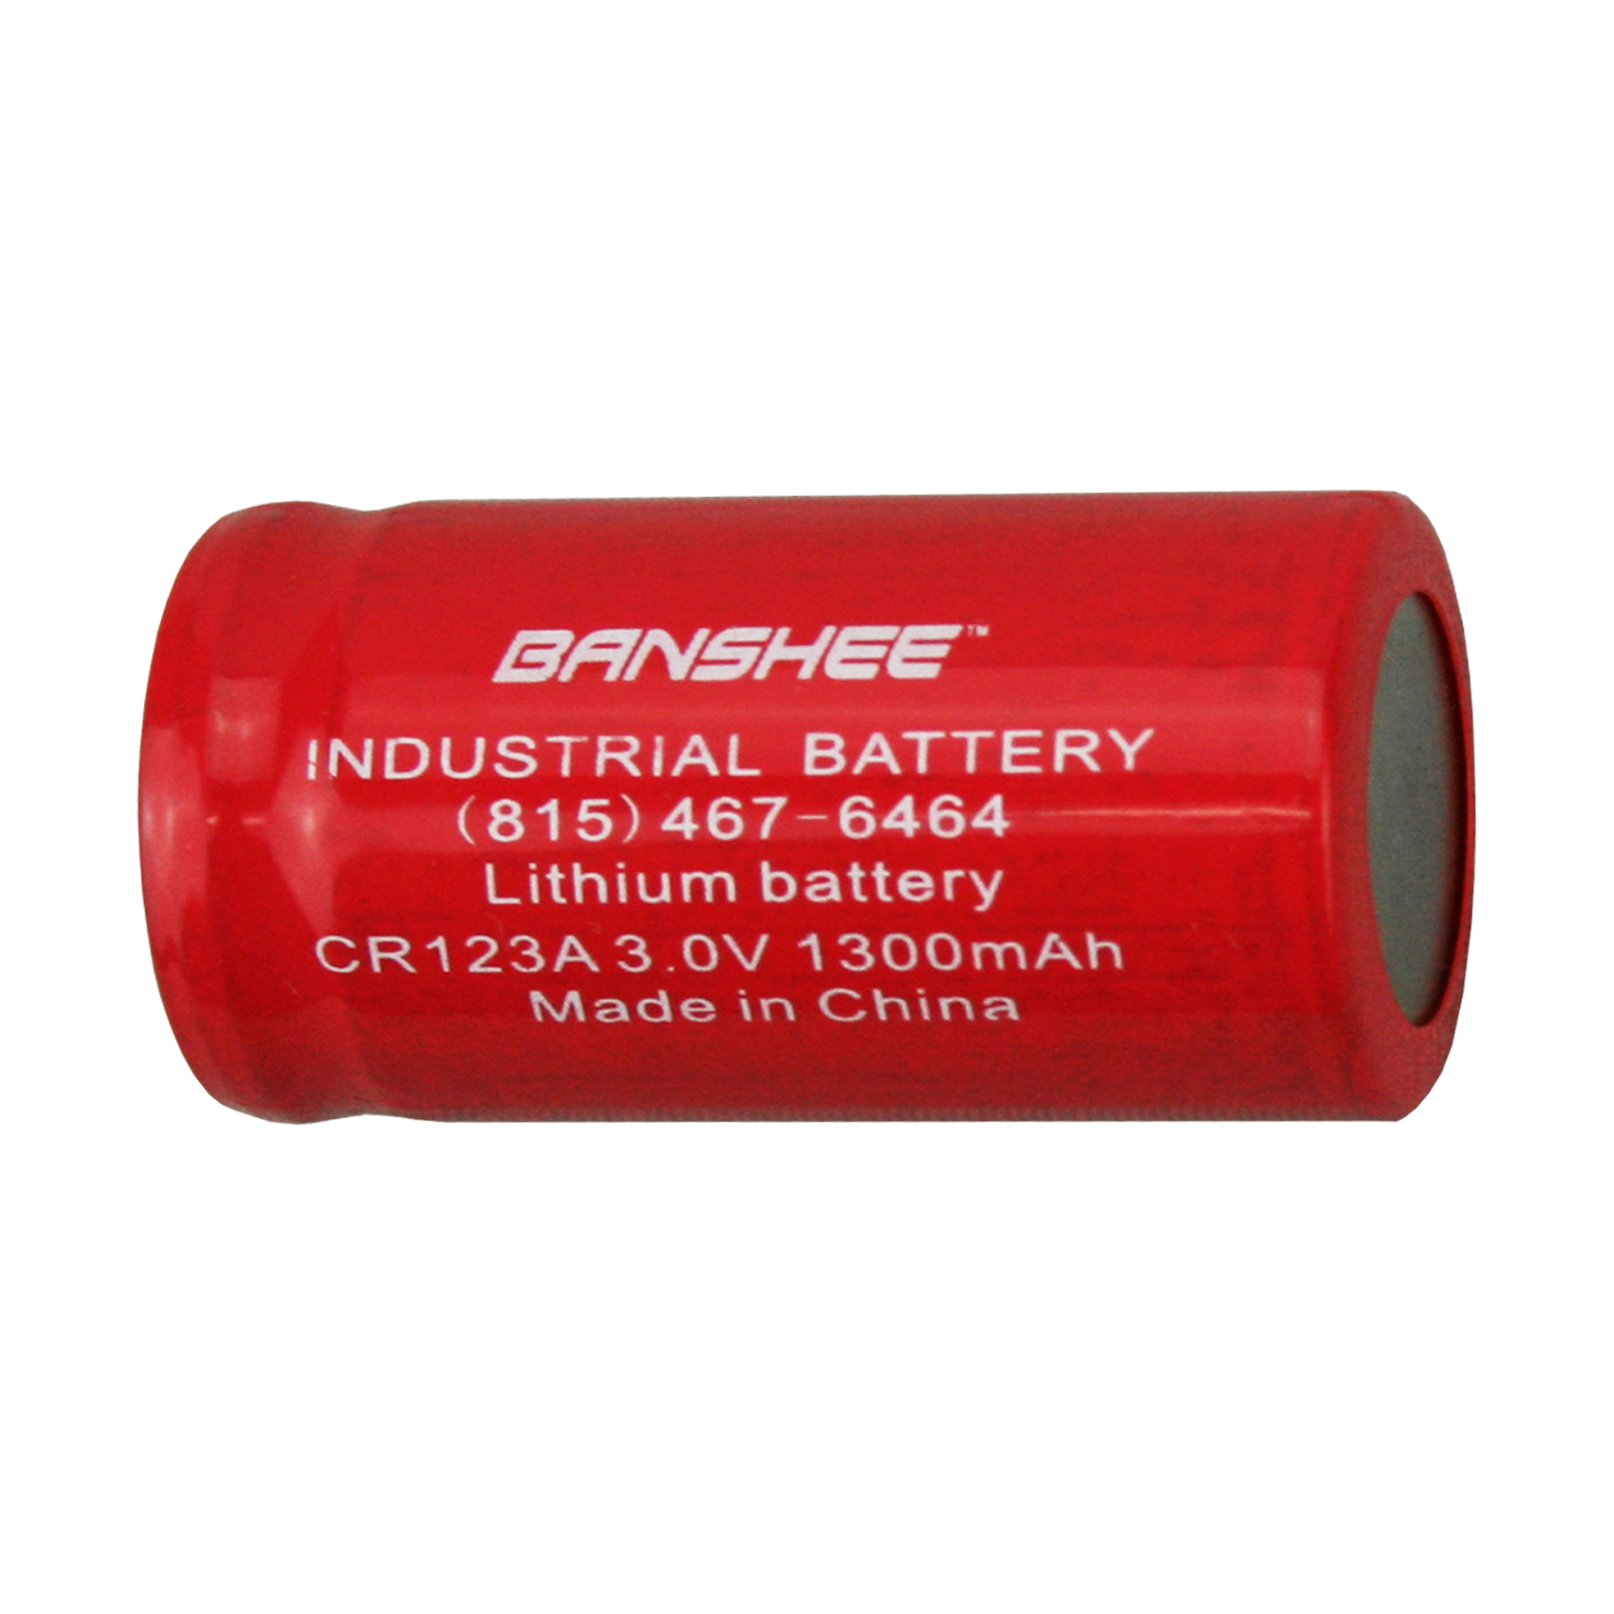 NEW Lithium Photo CR123A CR123 CR 123A 123 battery - Tank Brand  INDUSTRIAL TYPE 2